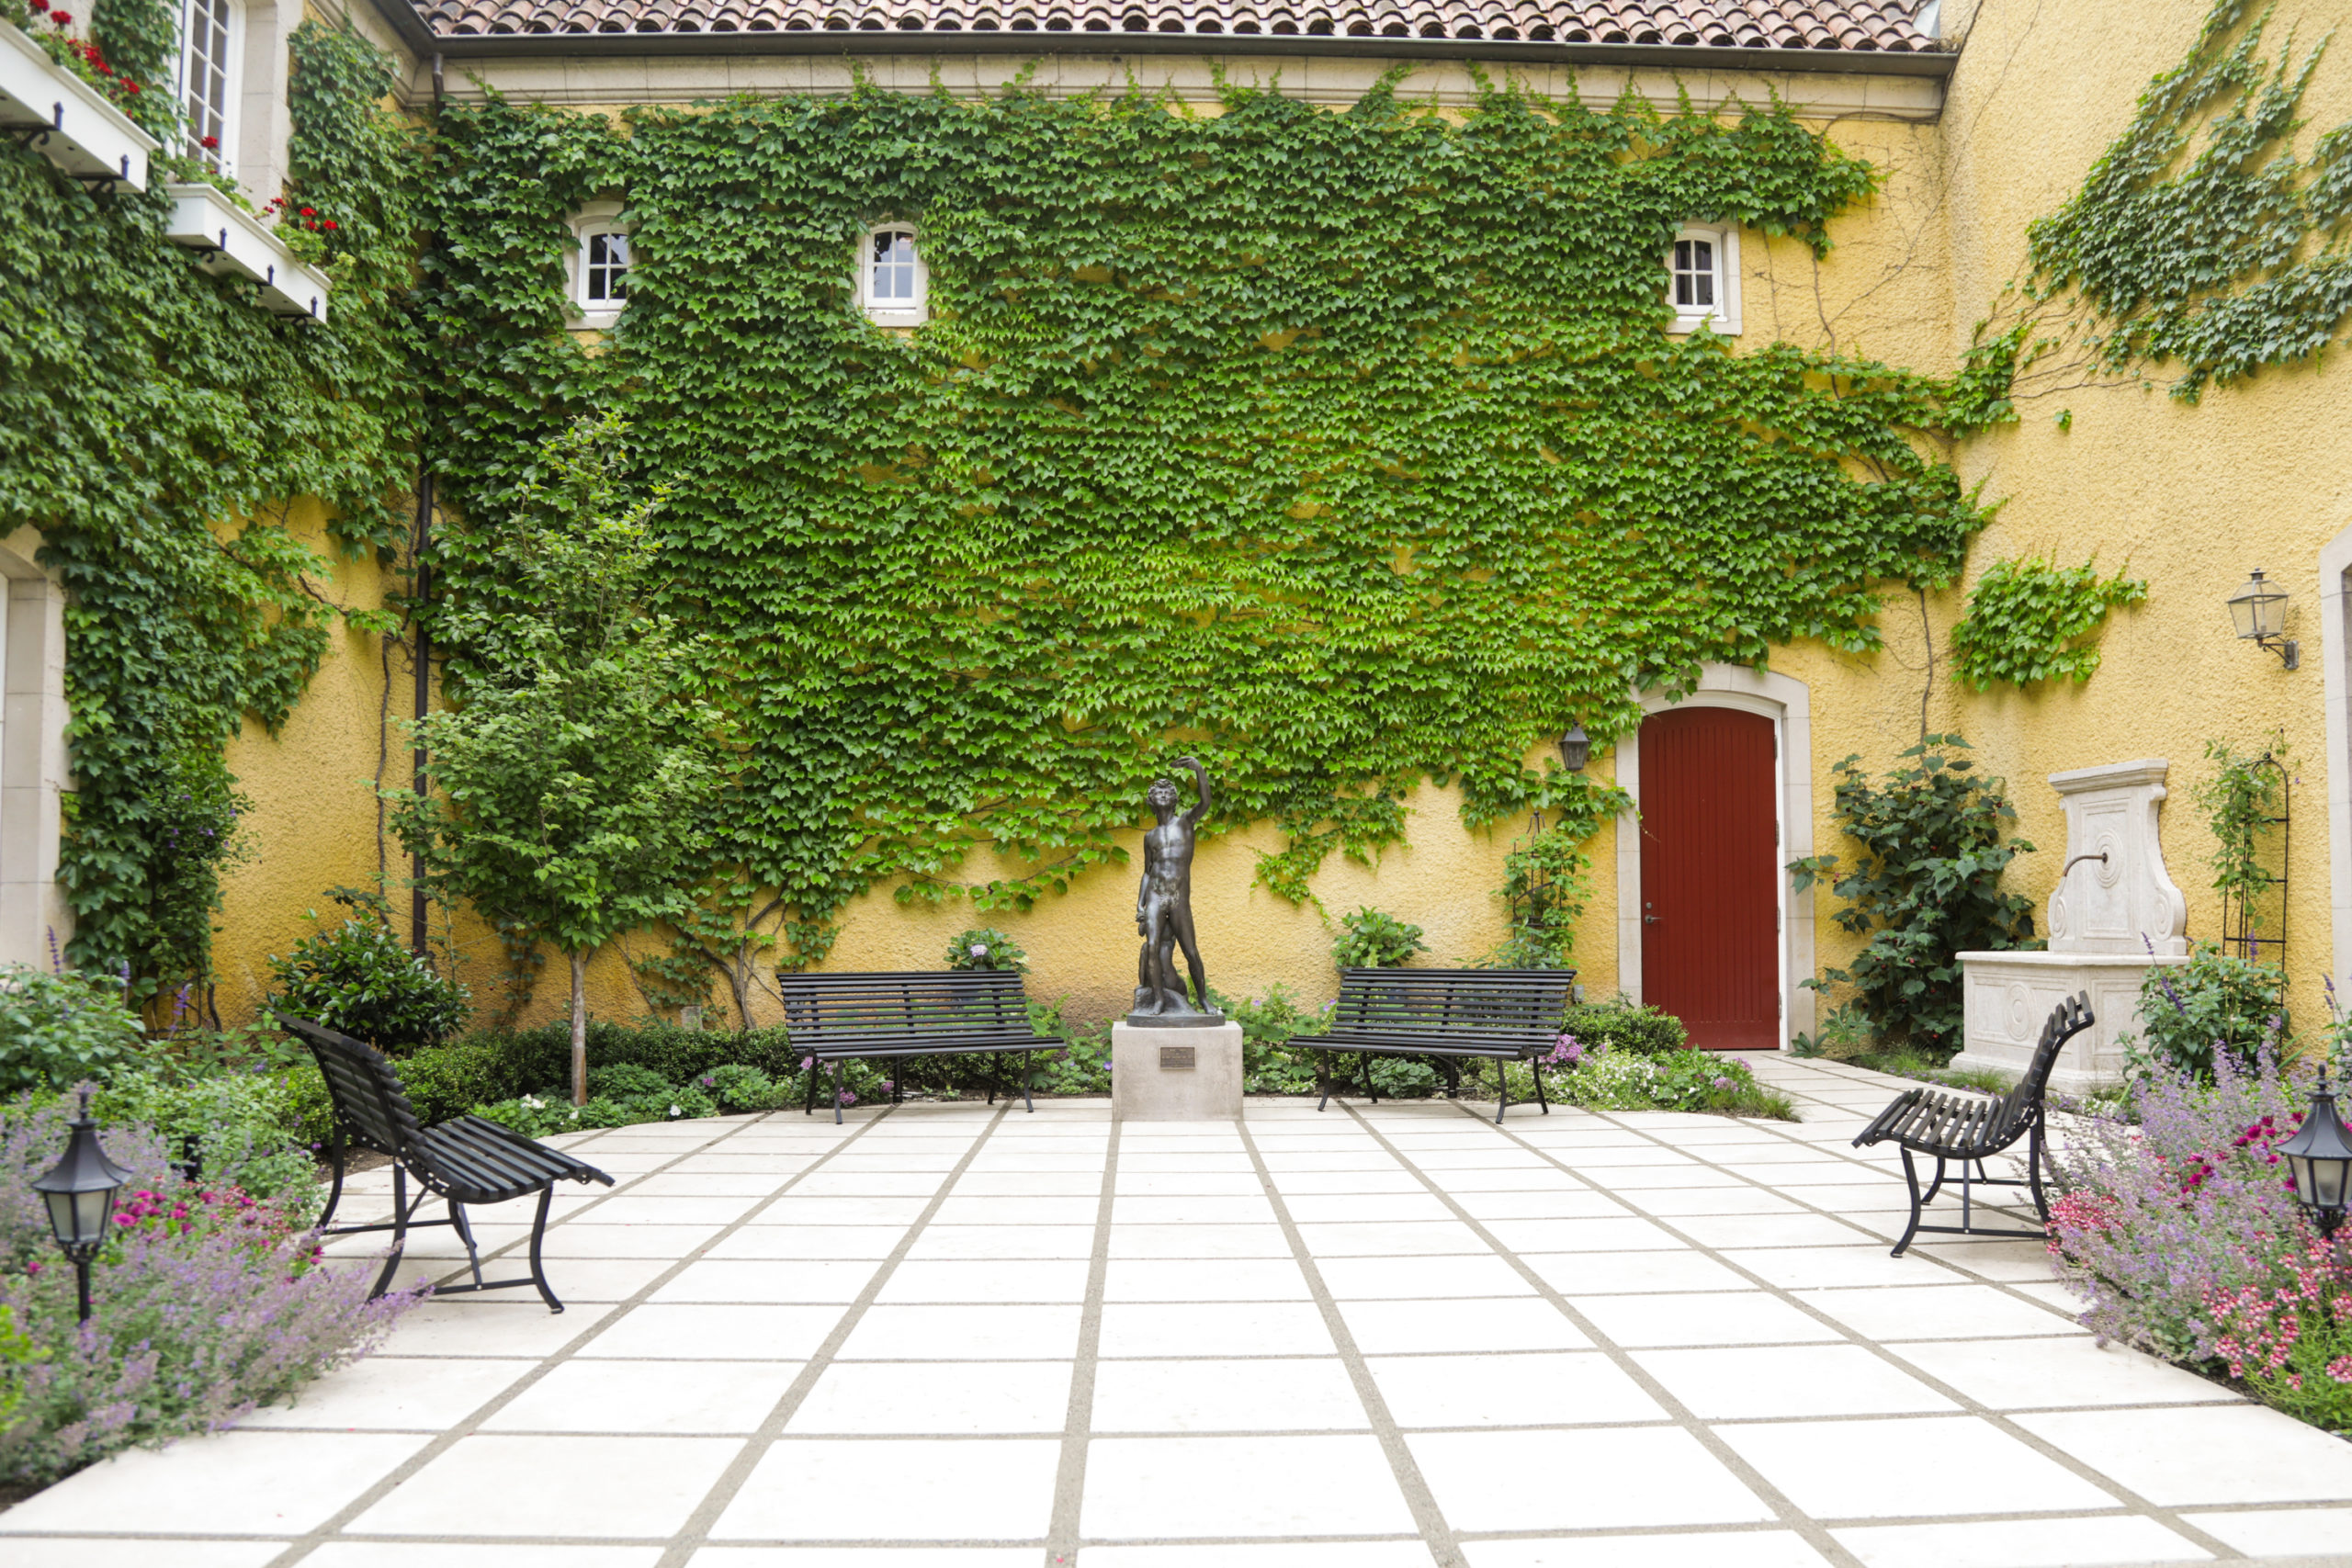 jordan winery outdoor courtyard with green ivy and park benches